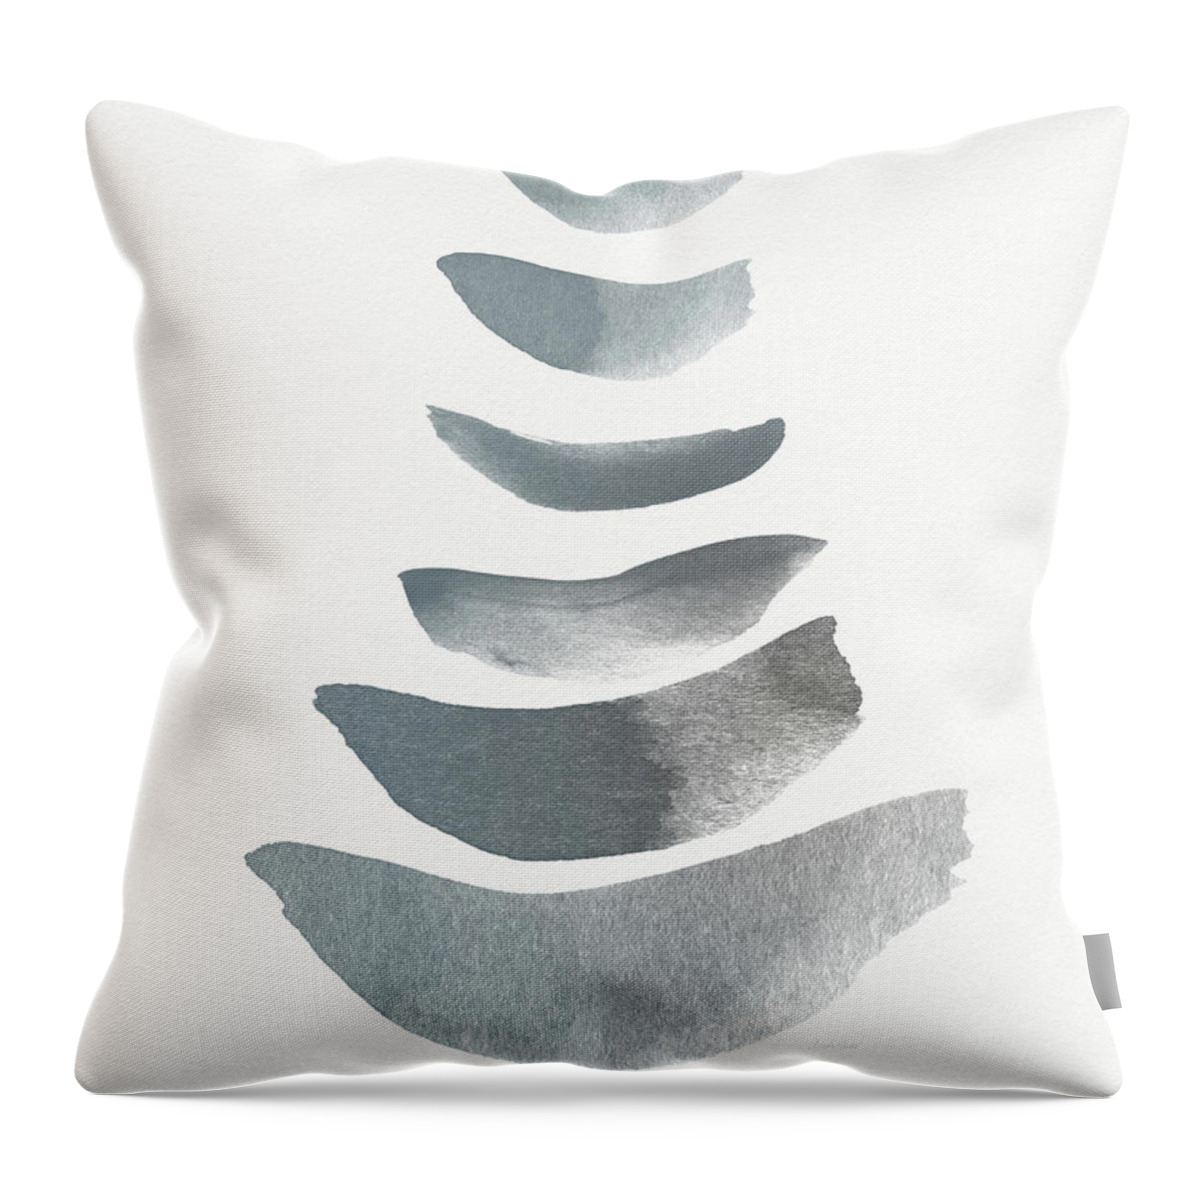 Spa Throw Pillow featuring the mixed media Floating 1- Zen Art by Linda Woods by Linda Woods